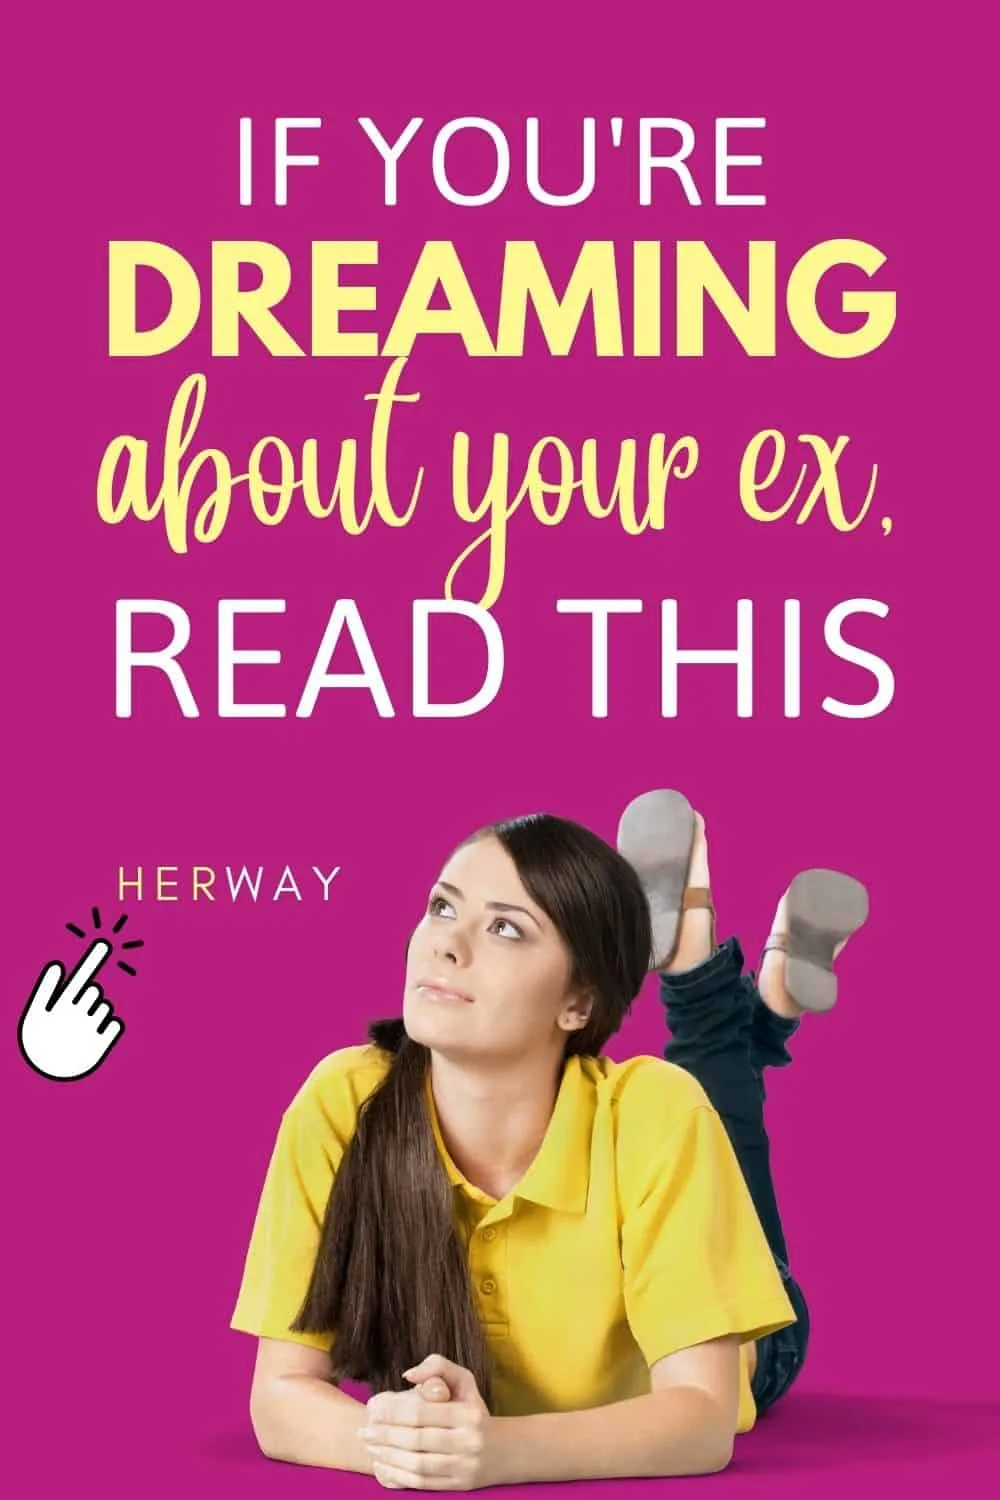 What Is The Spiritual Meaning Of Dreaming About Your Ex Pinterest